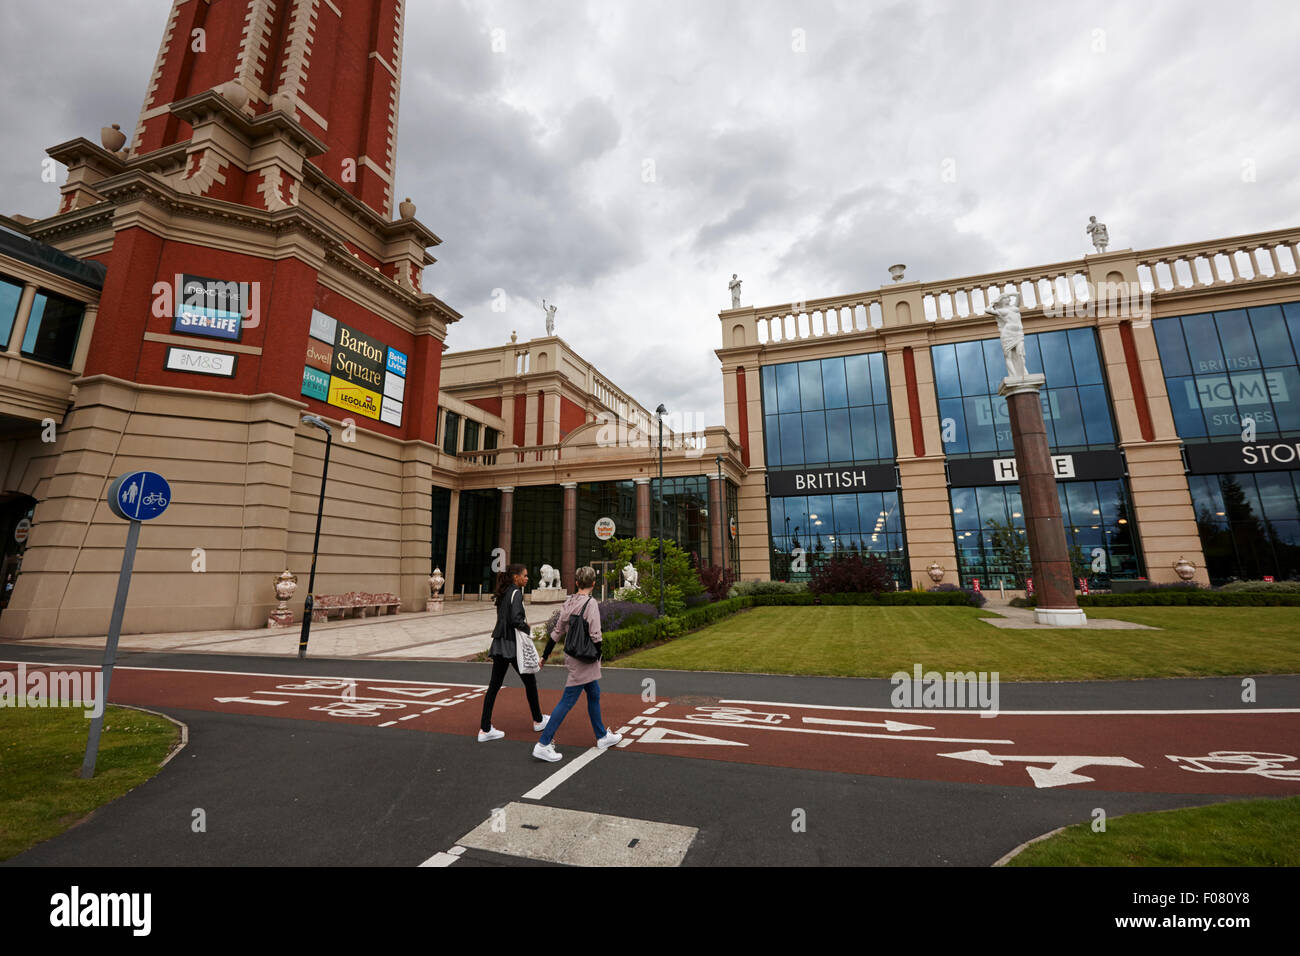 barton square section of the trafford centre Manchester uk Stock Photo